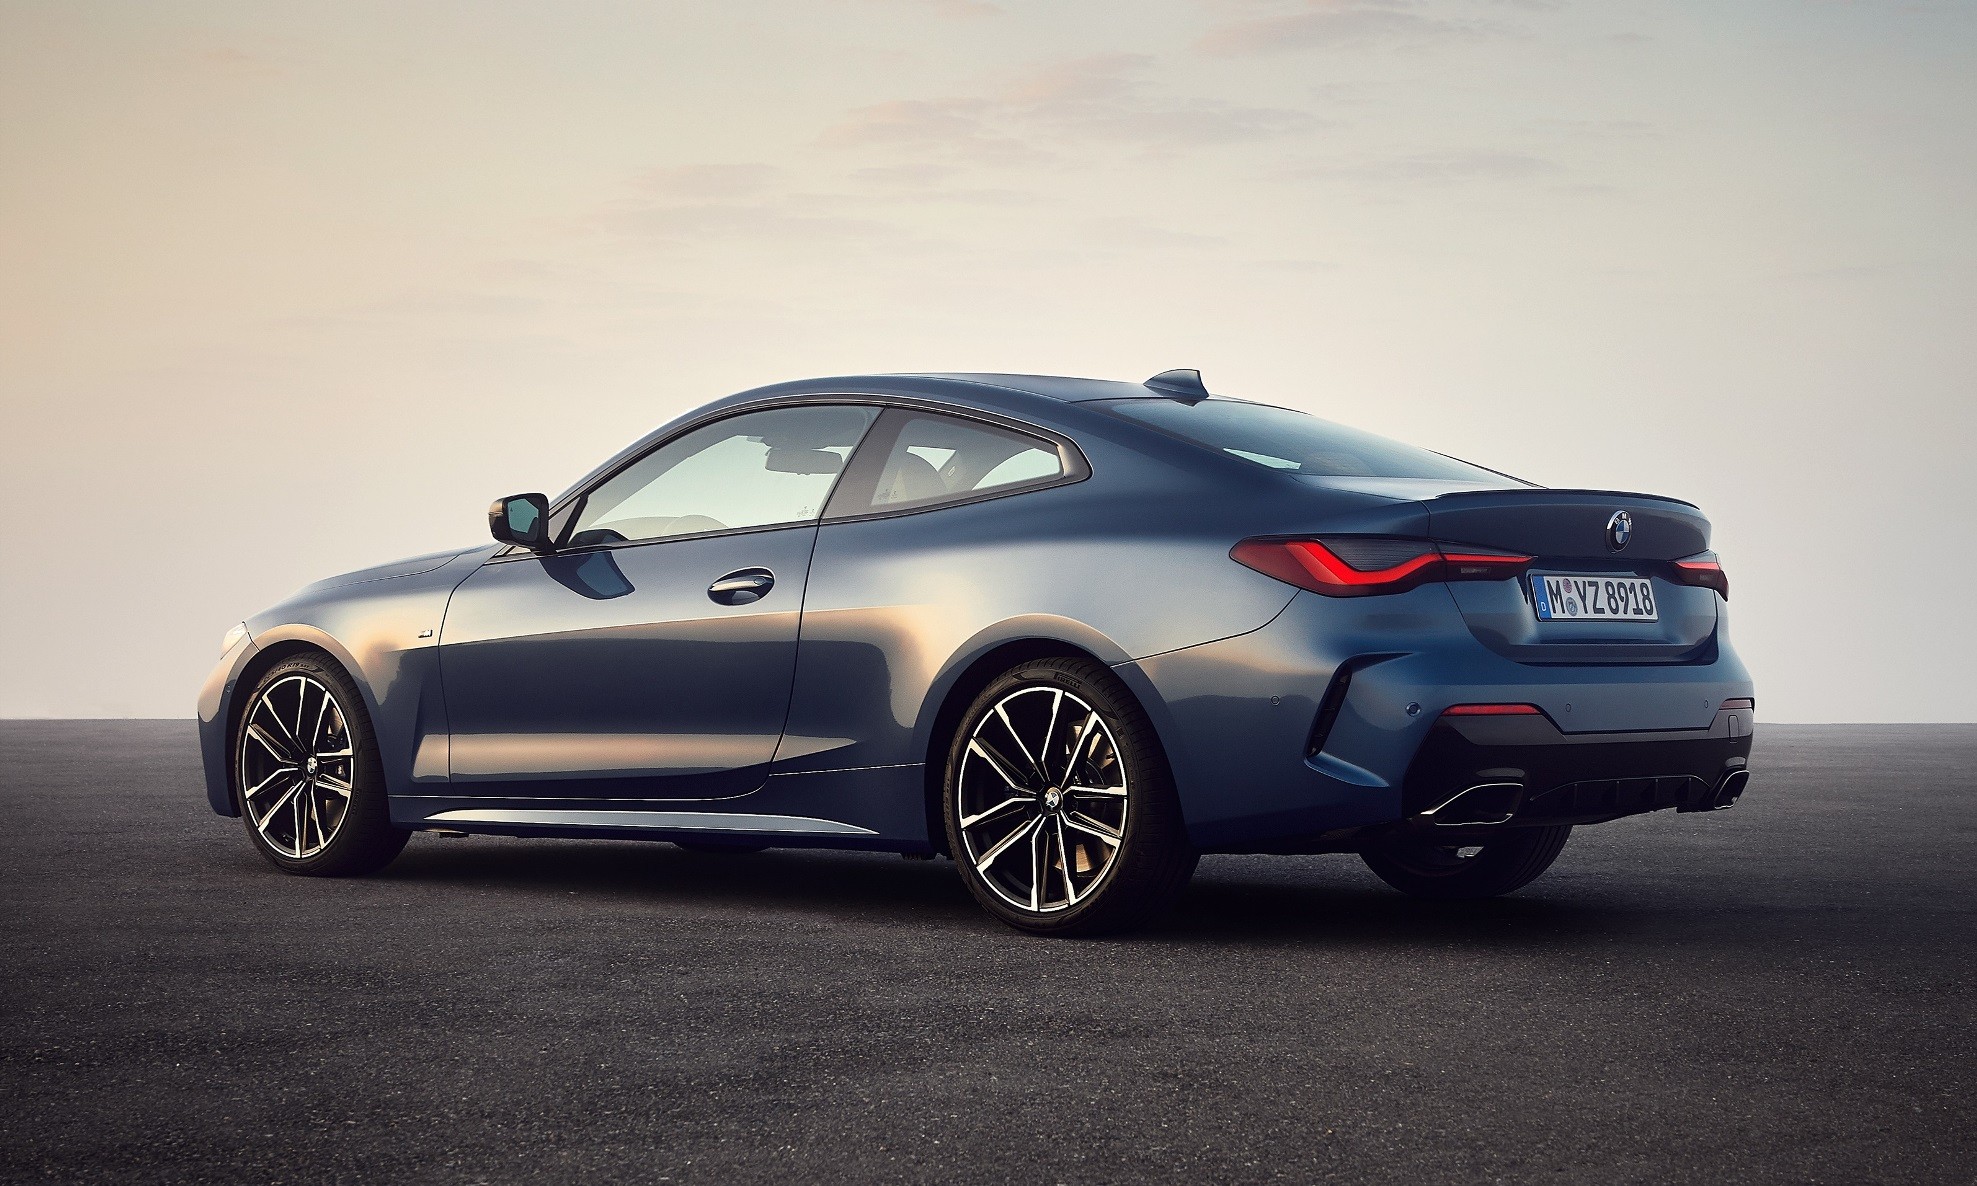 BMW 4 Series Coupe unveiled rear